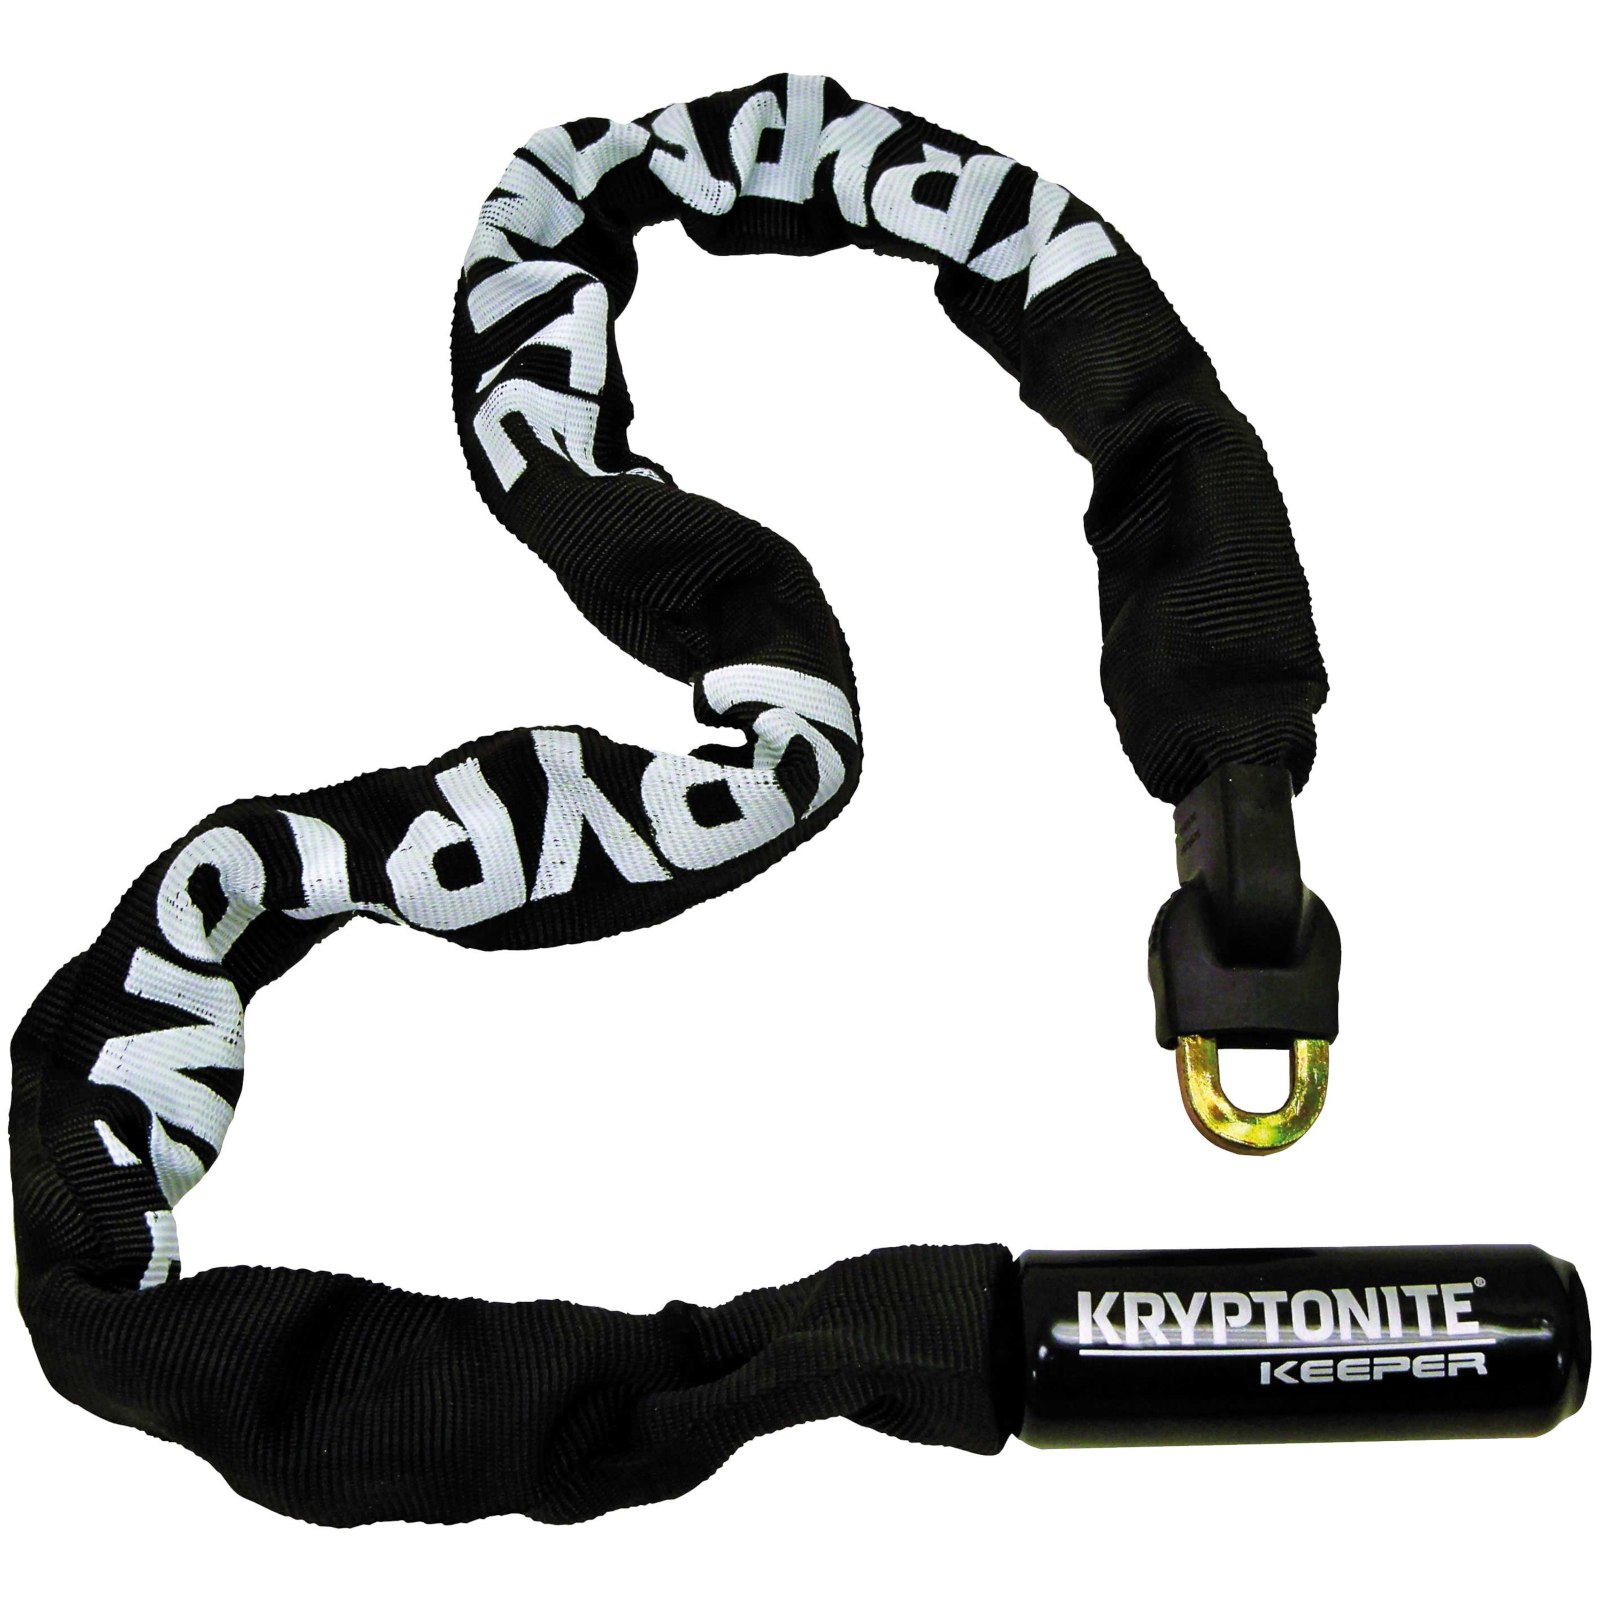 Picture of Kryptonite Keeper Integrated Chain 785 Chain Lock - Black